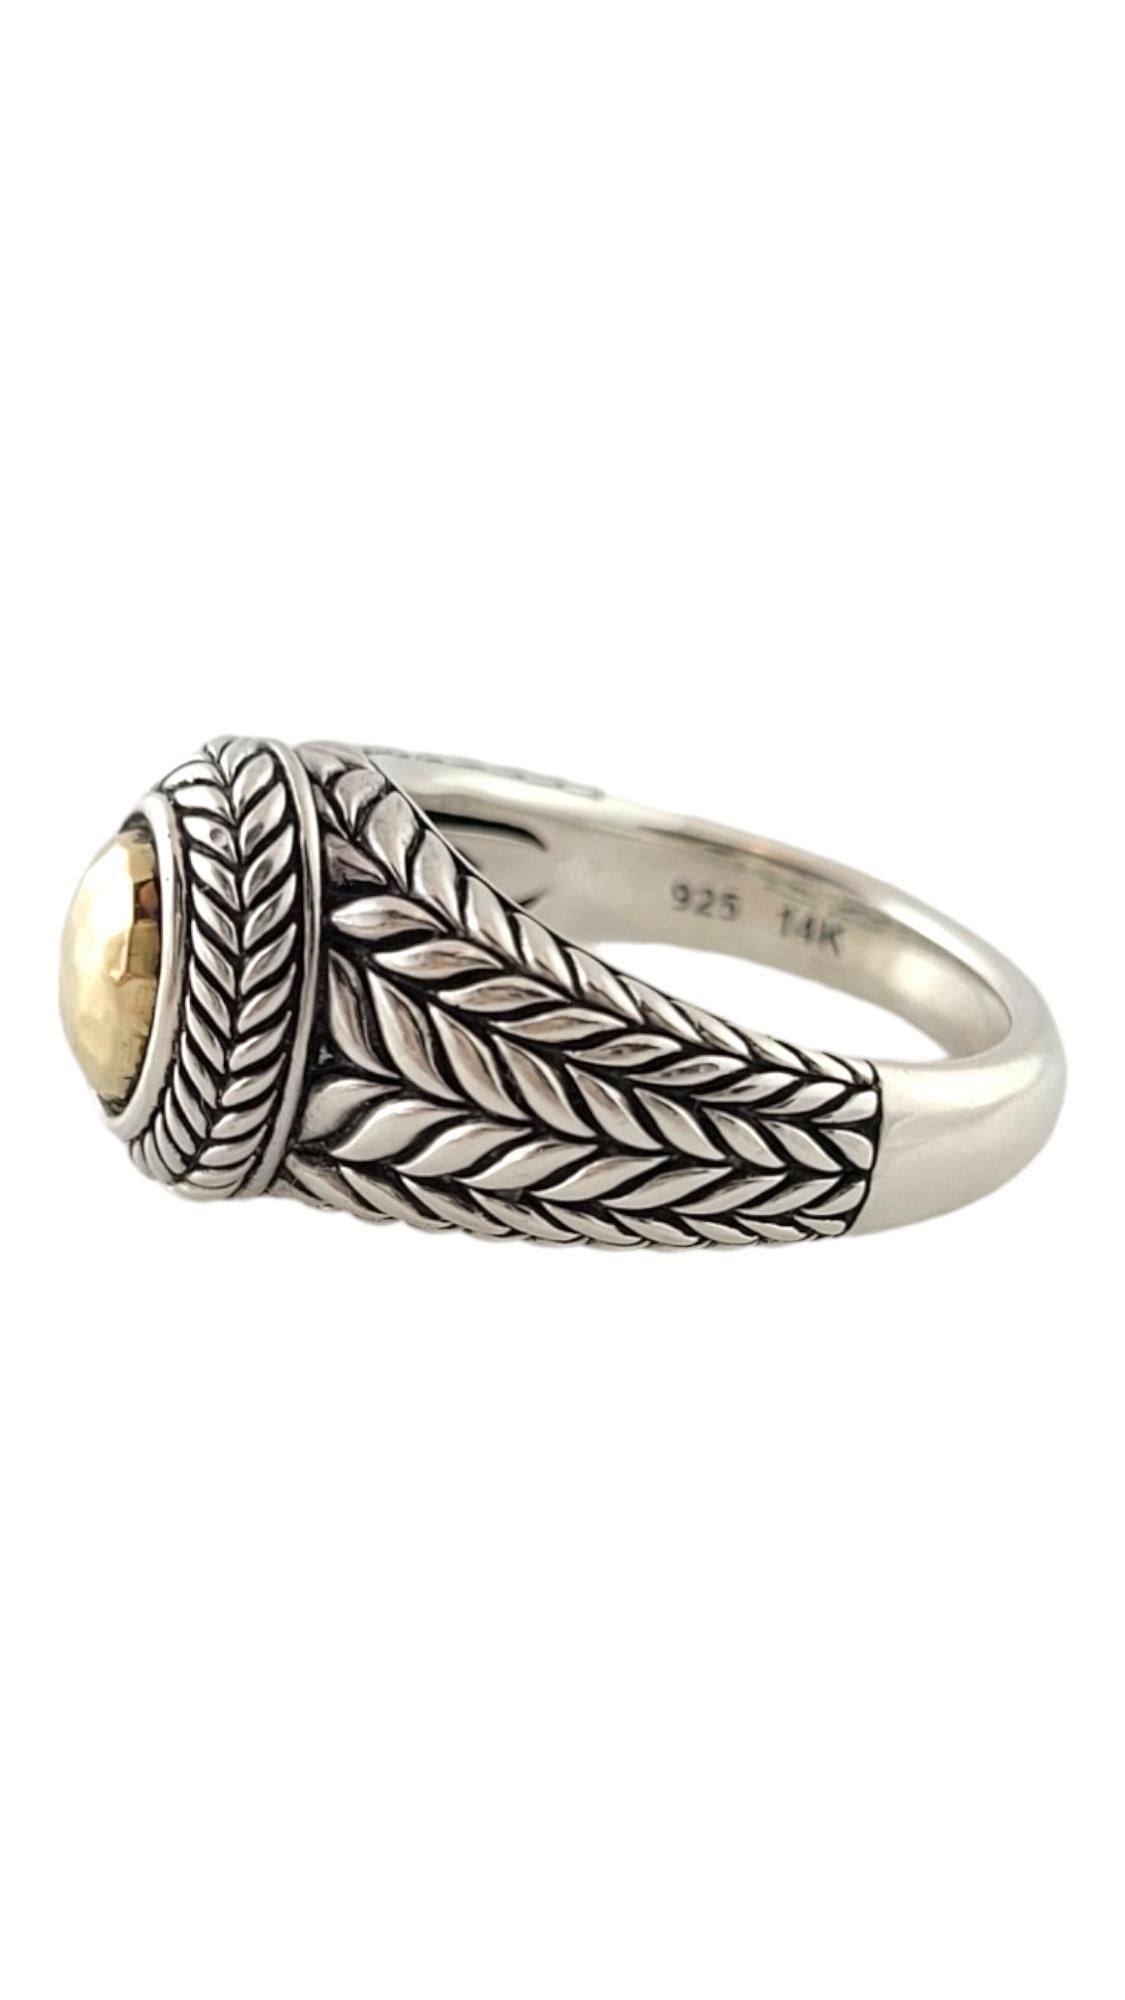 John Hardy JAi 14K Yellow Gold and Sterling Silver Basketweave Ring Size 7

This beautiful JAi ring by John Hardy was crafted with meticulous detail from sterling silver and 14K yellow gold!

Ring size: 7
Shank: 3.65mm
Front: 12.30mm X 10.70mm X